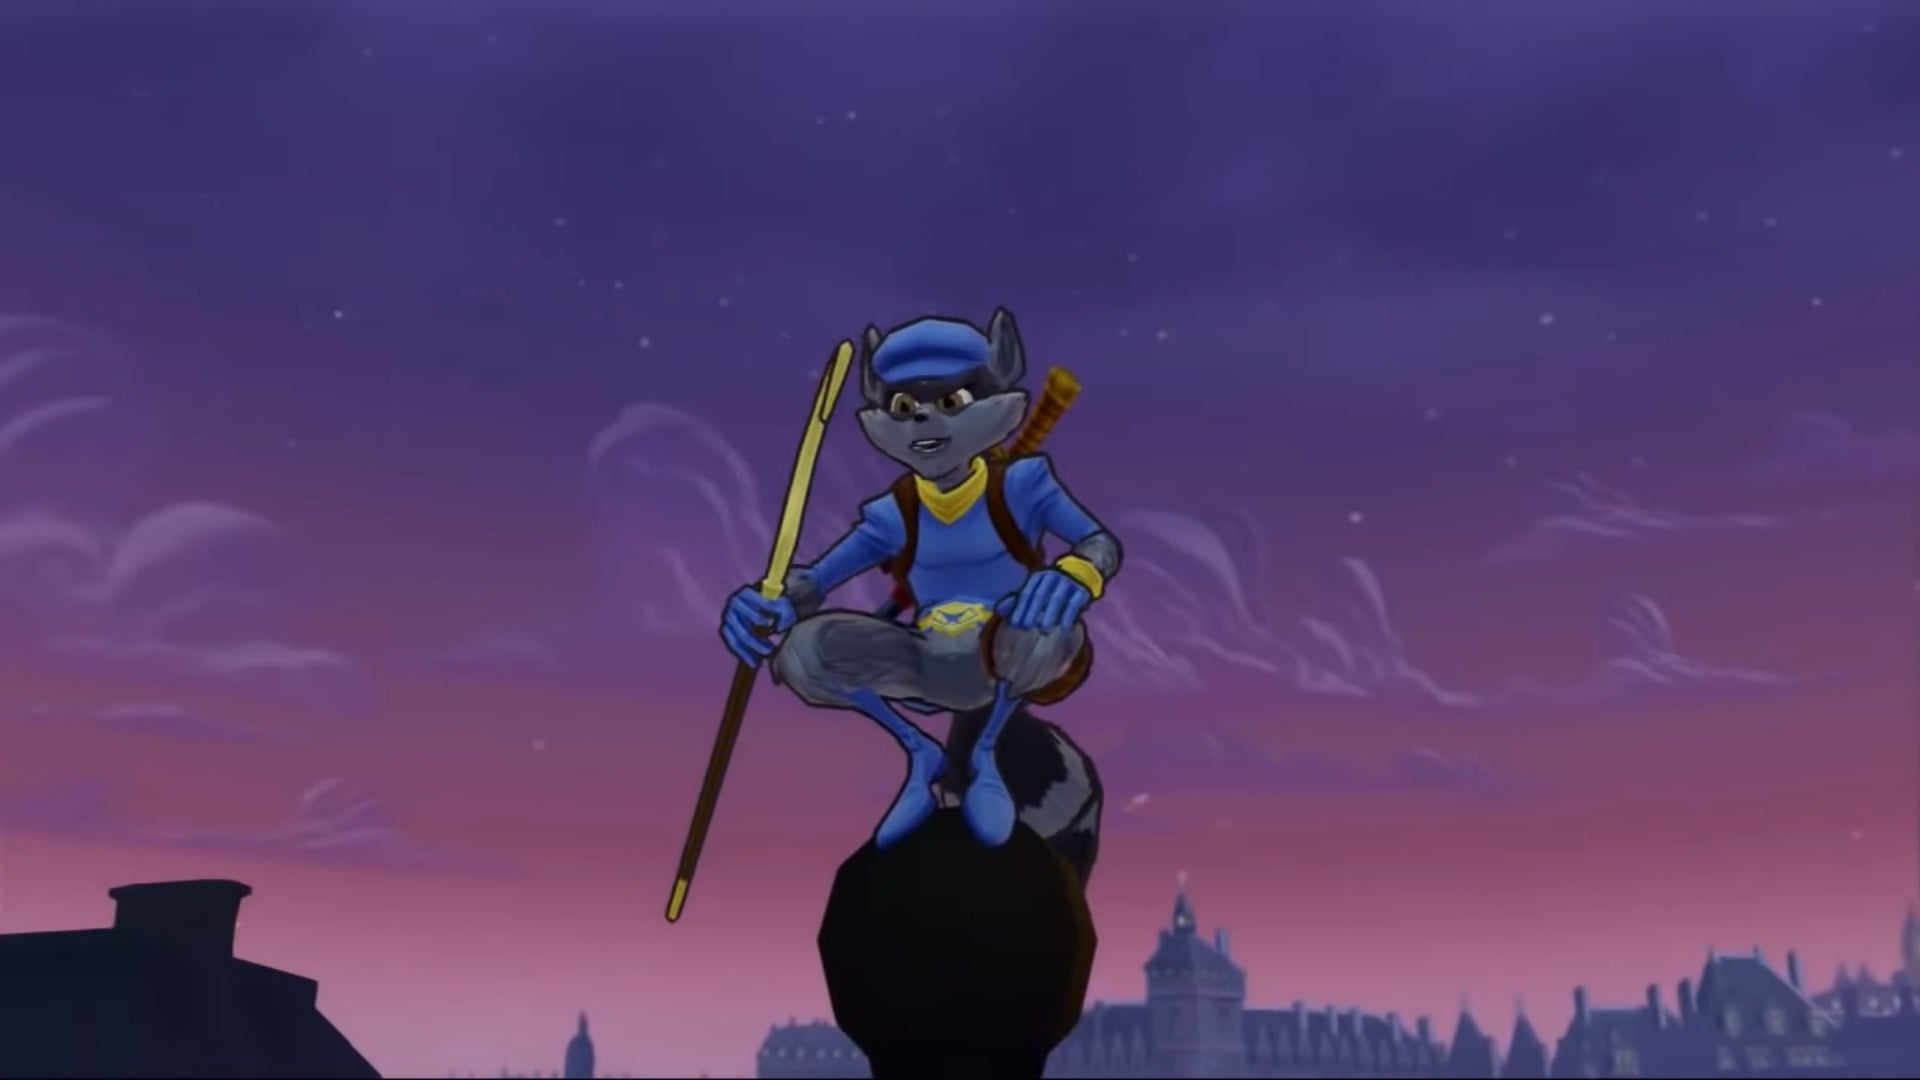 Sly Cooper from Sly 4